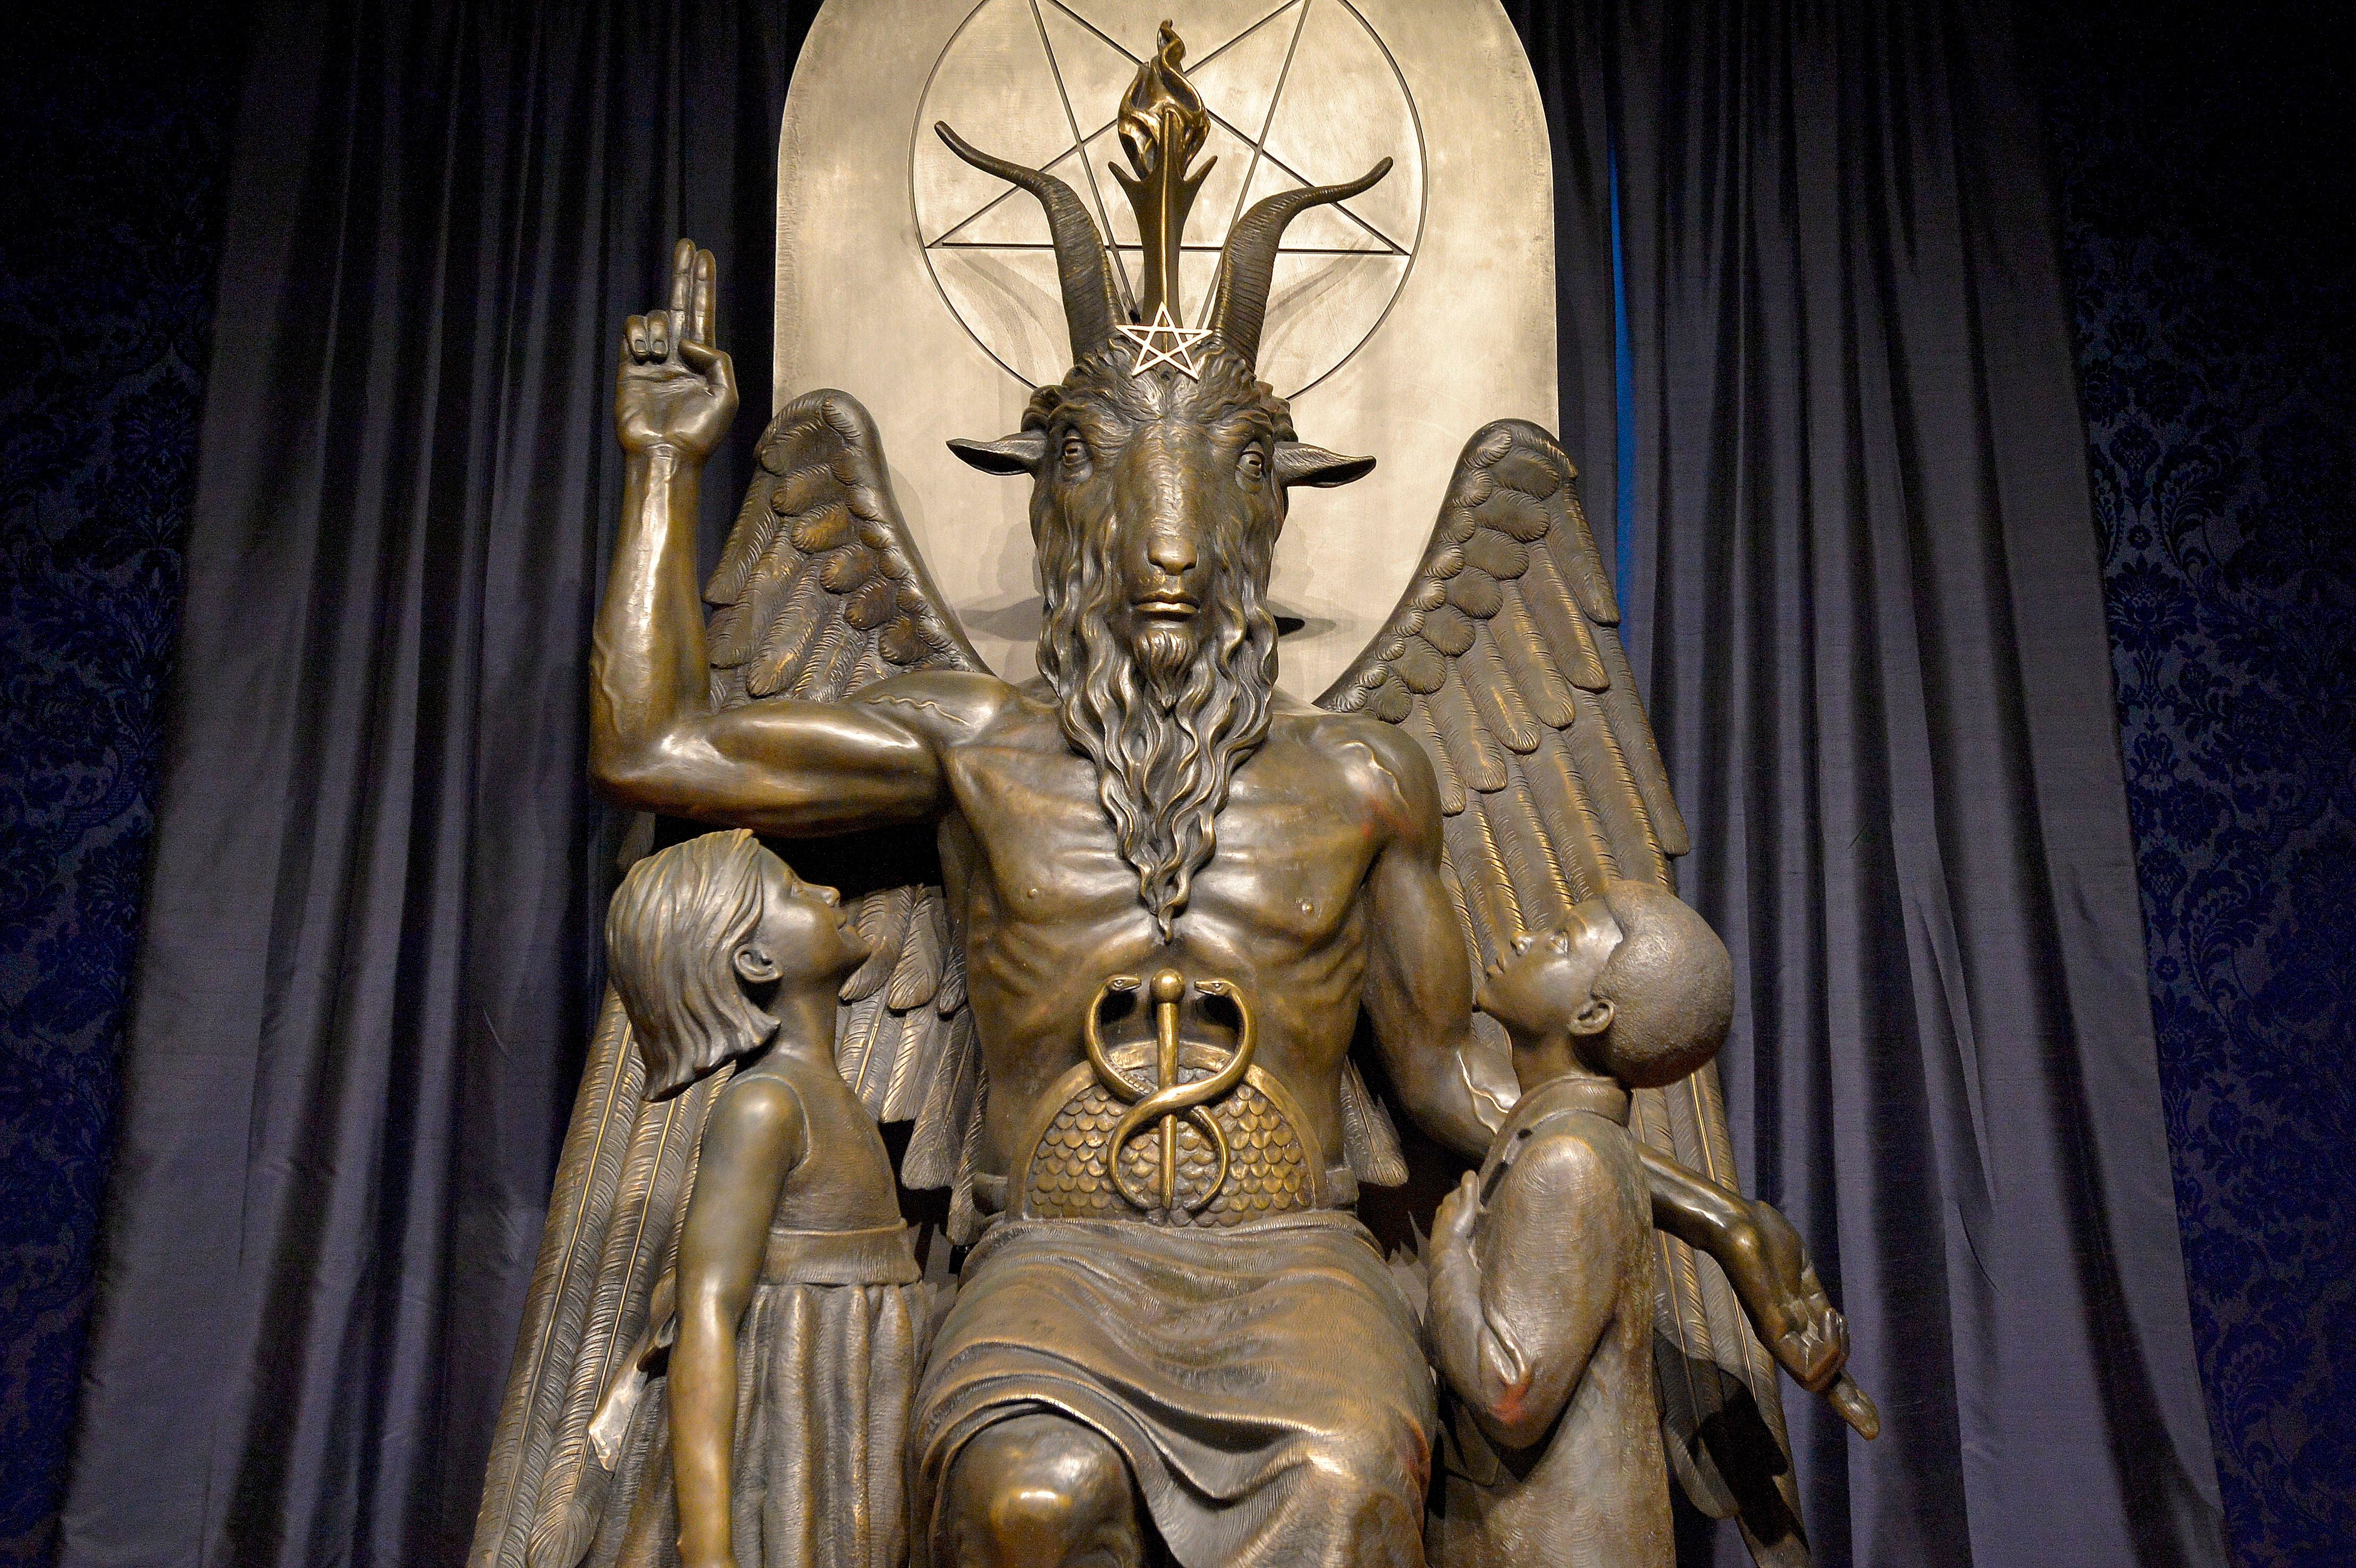 The Baphomet statue is seen in the conversion room at the Satanic Temple where a ‘Hell House' is being held in Salem, Massachusett on October 8, 2019